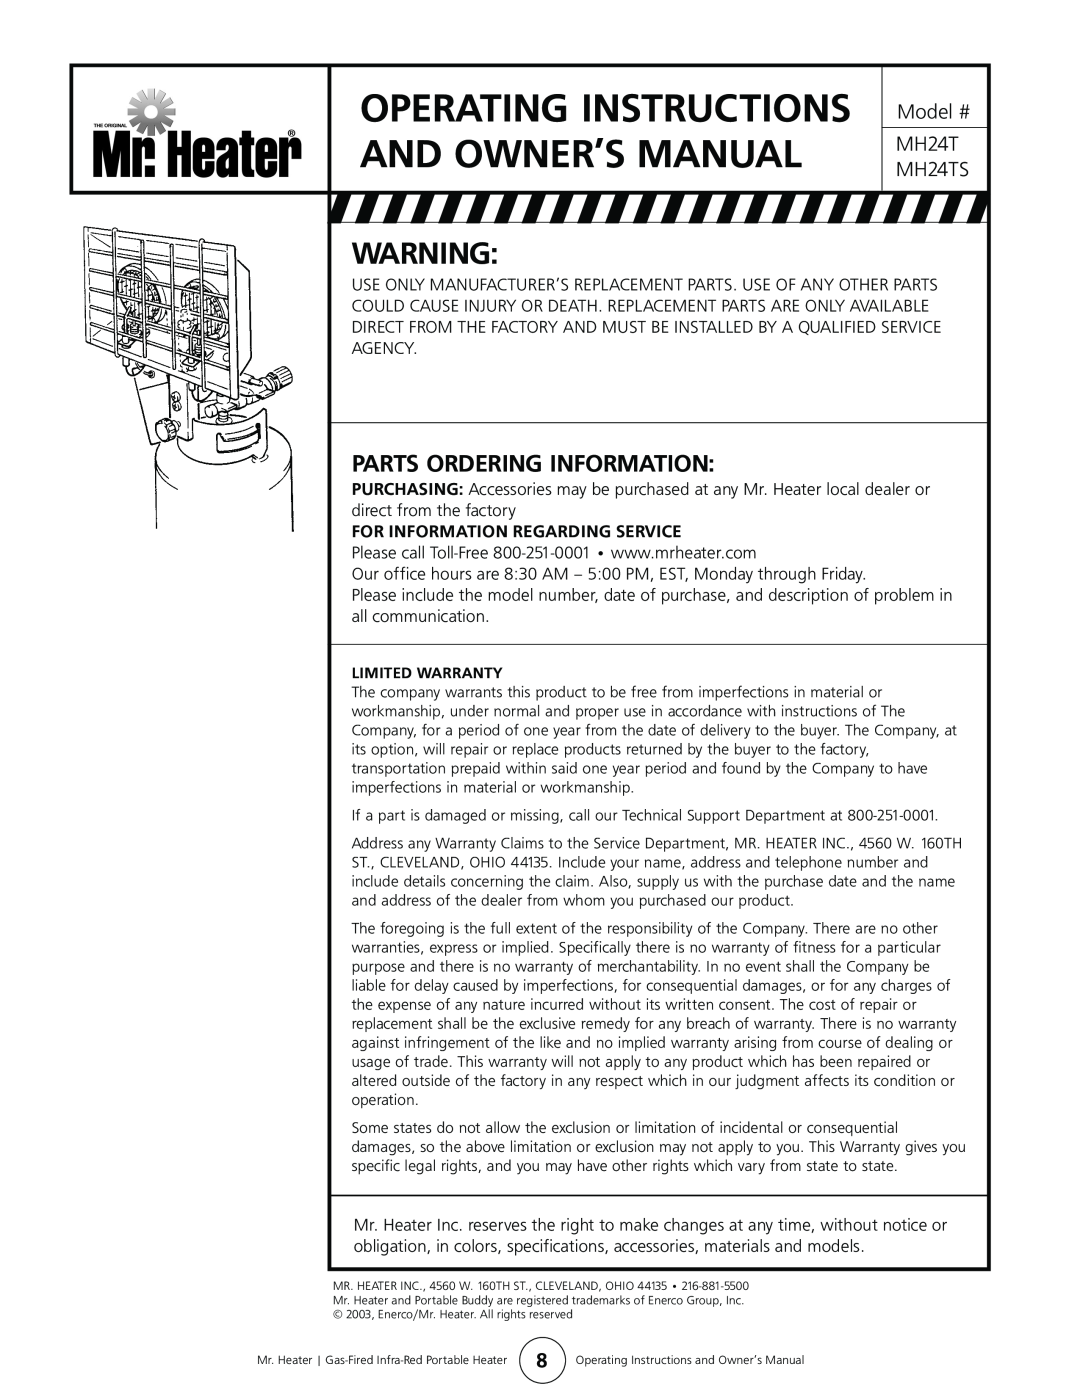 Enerco MH24TS owner manual Parts Ordering Information, For Information Regarding Service 